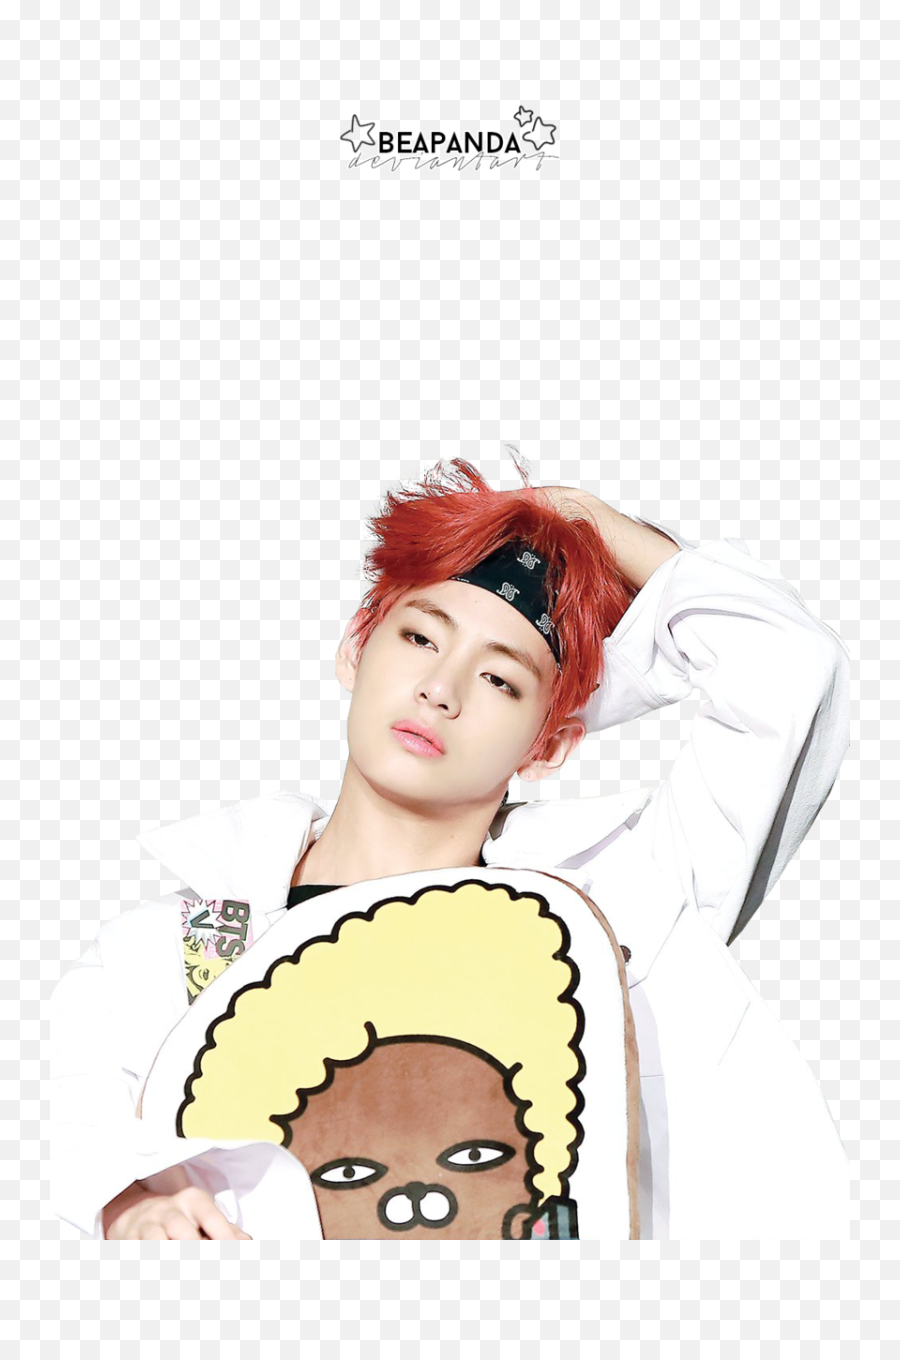 V Bts Red Hair Png Image - V Bts Red Hair,Red Hair Png